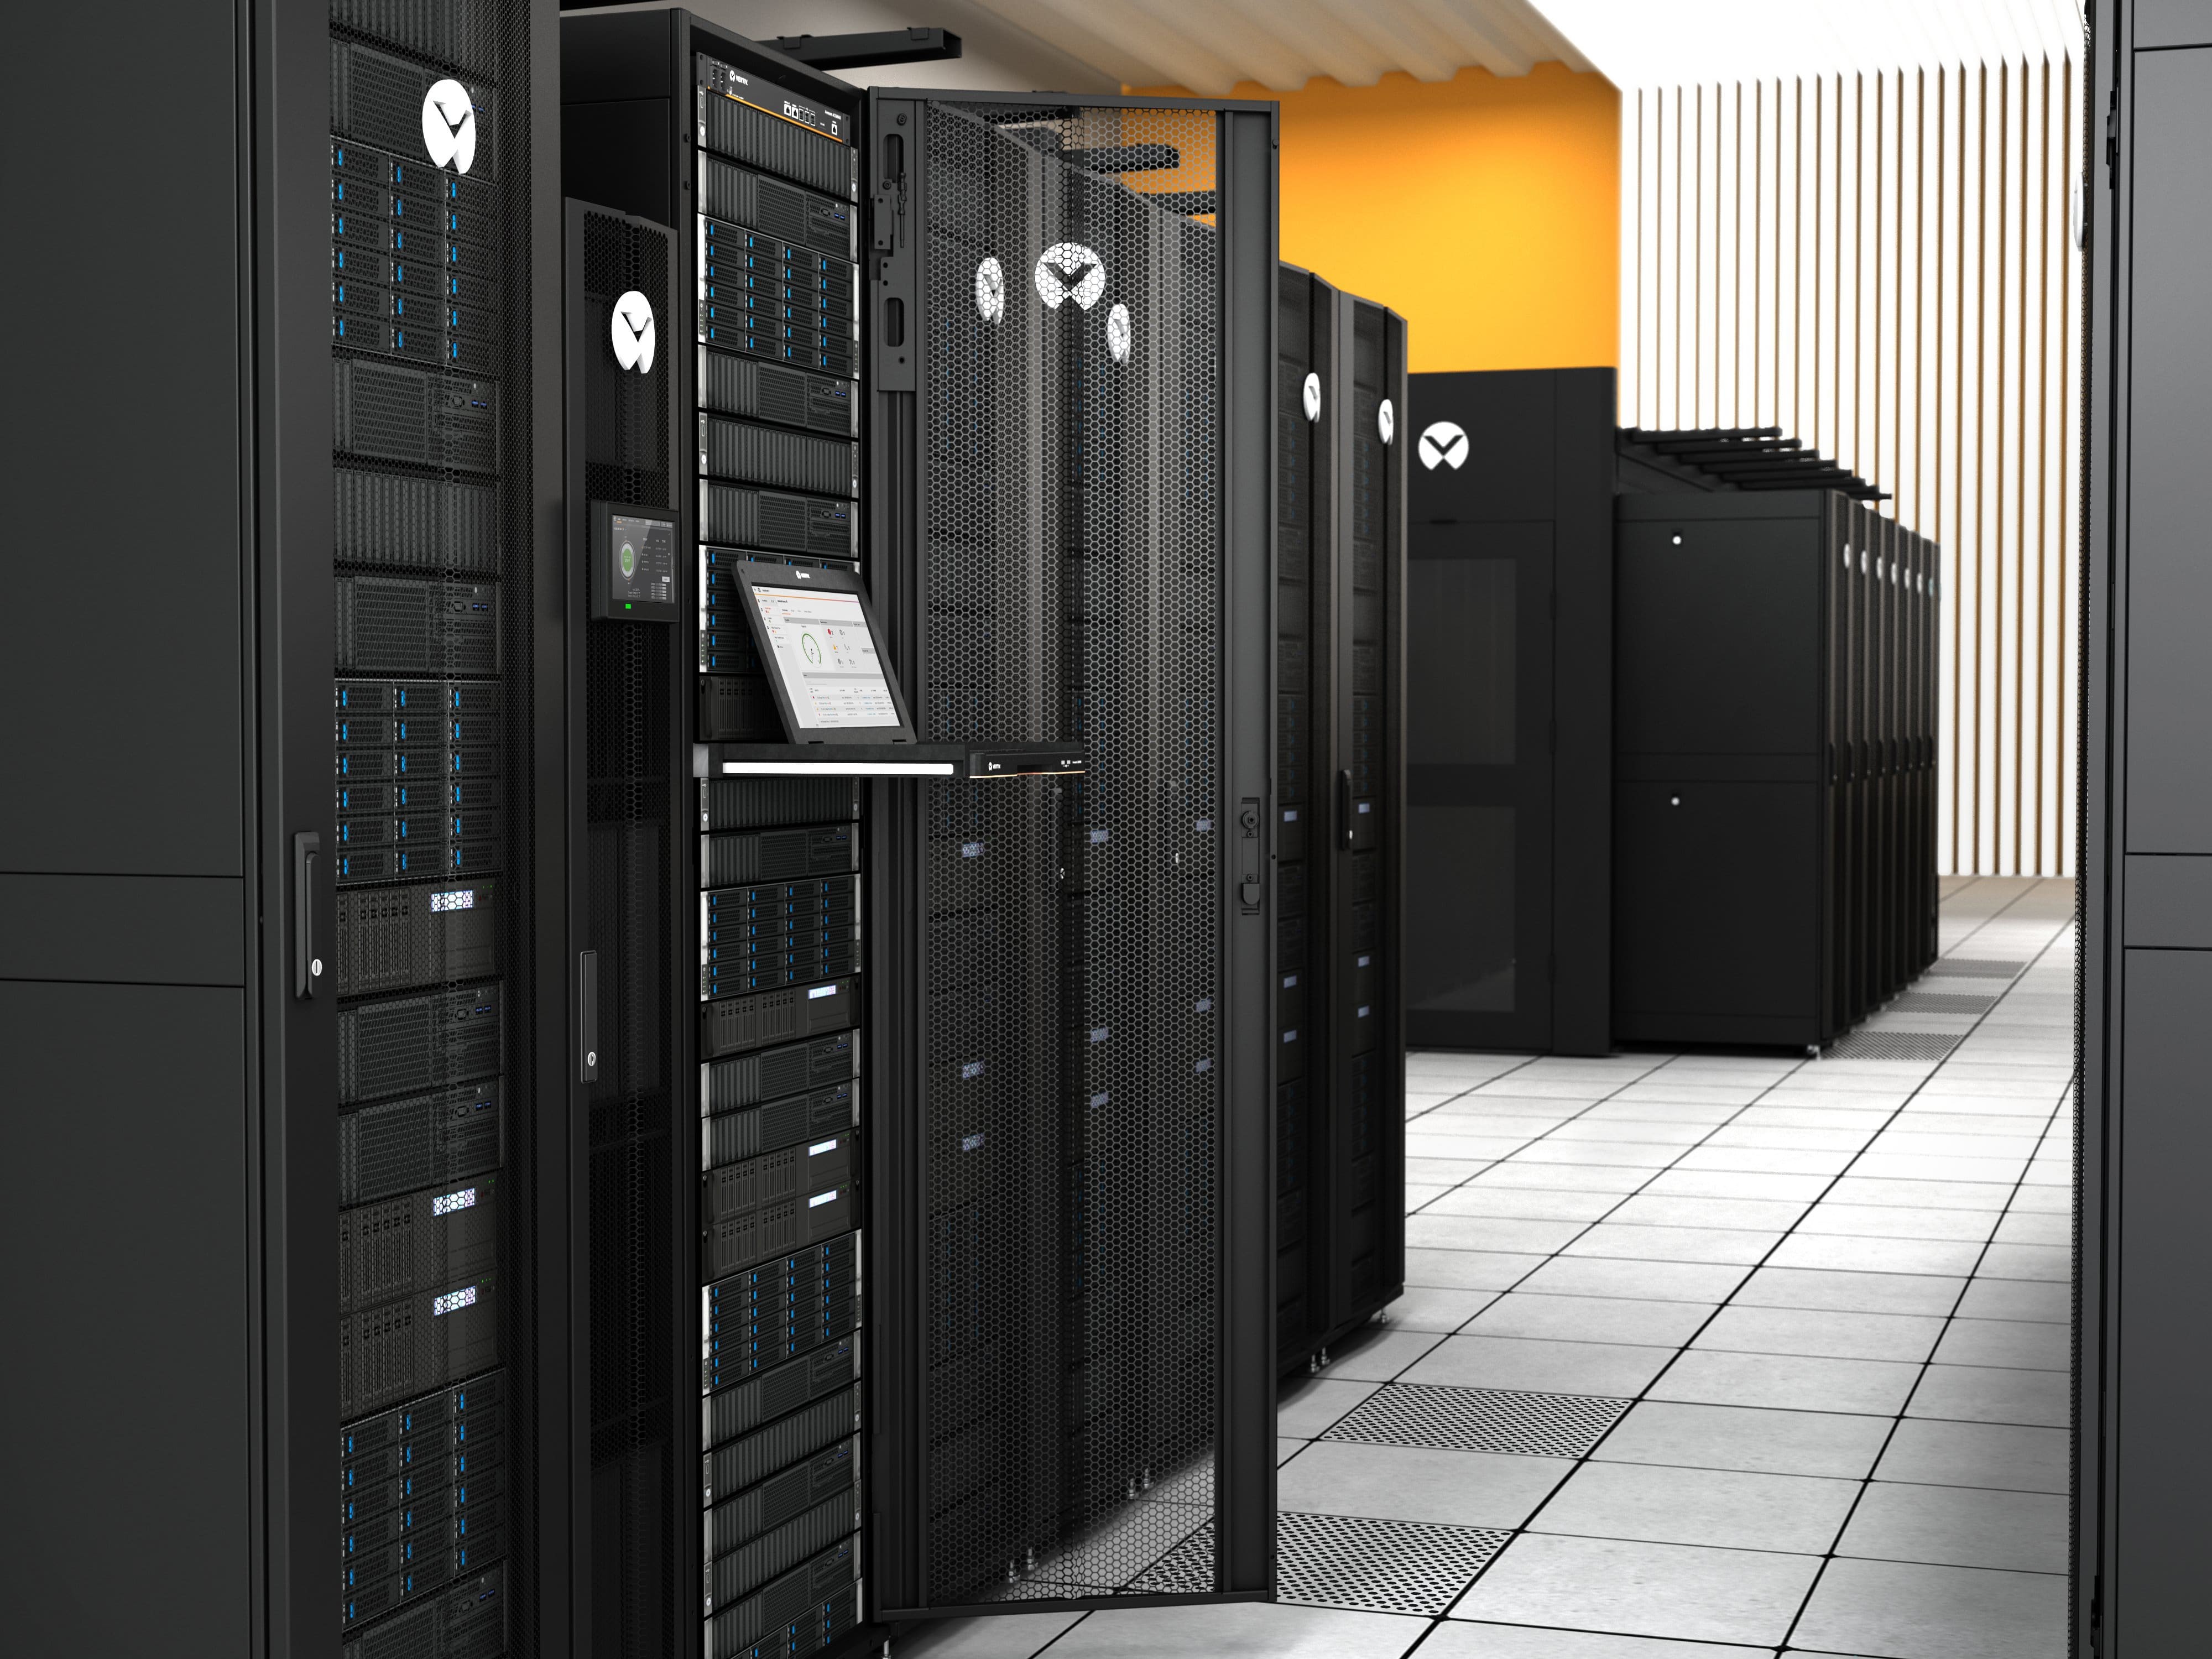 vertiv-data-center-solutions-featuring-aisle-containment-and-remote-monitoring-min-1686123739.jpg